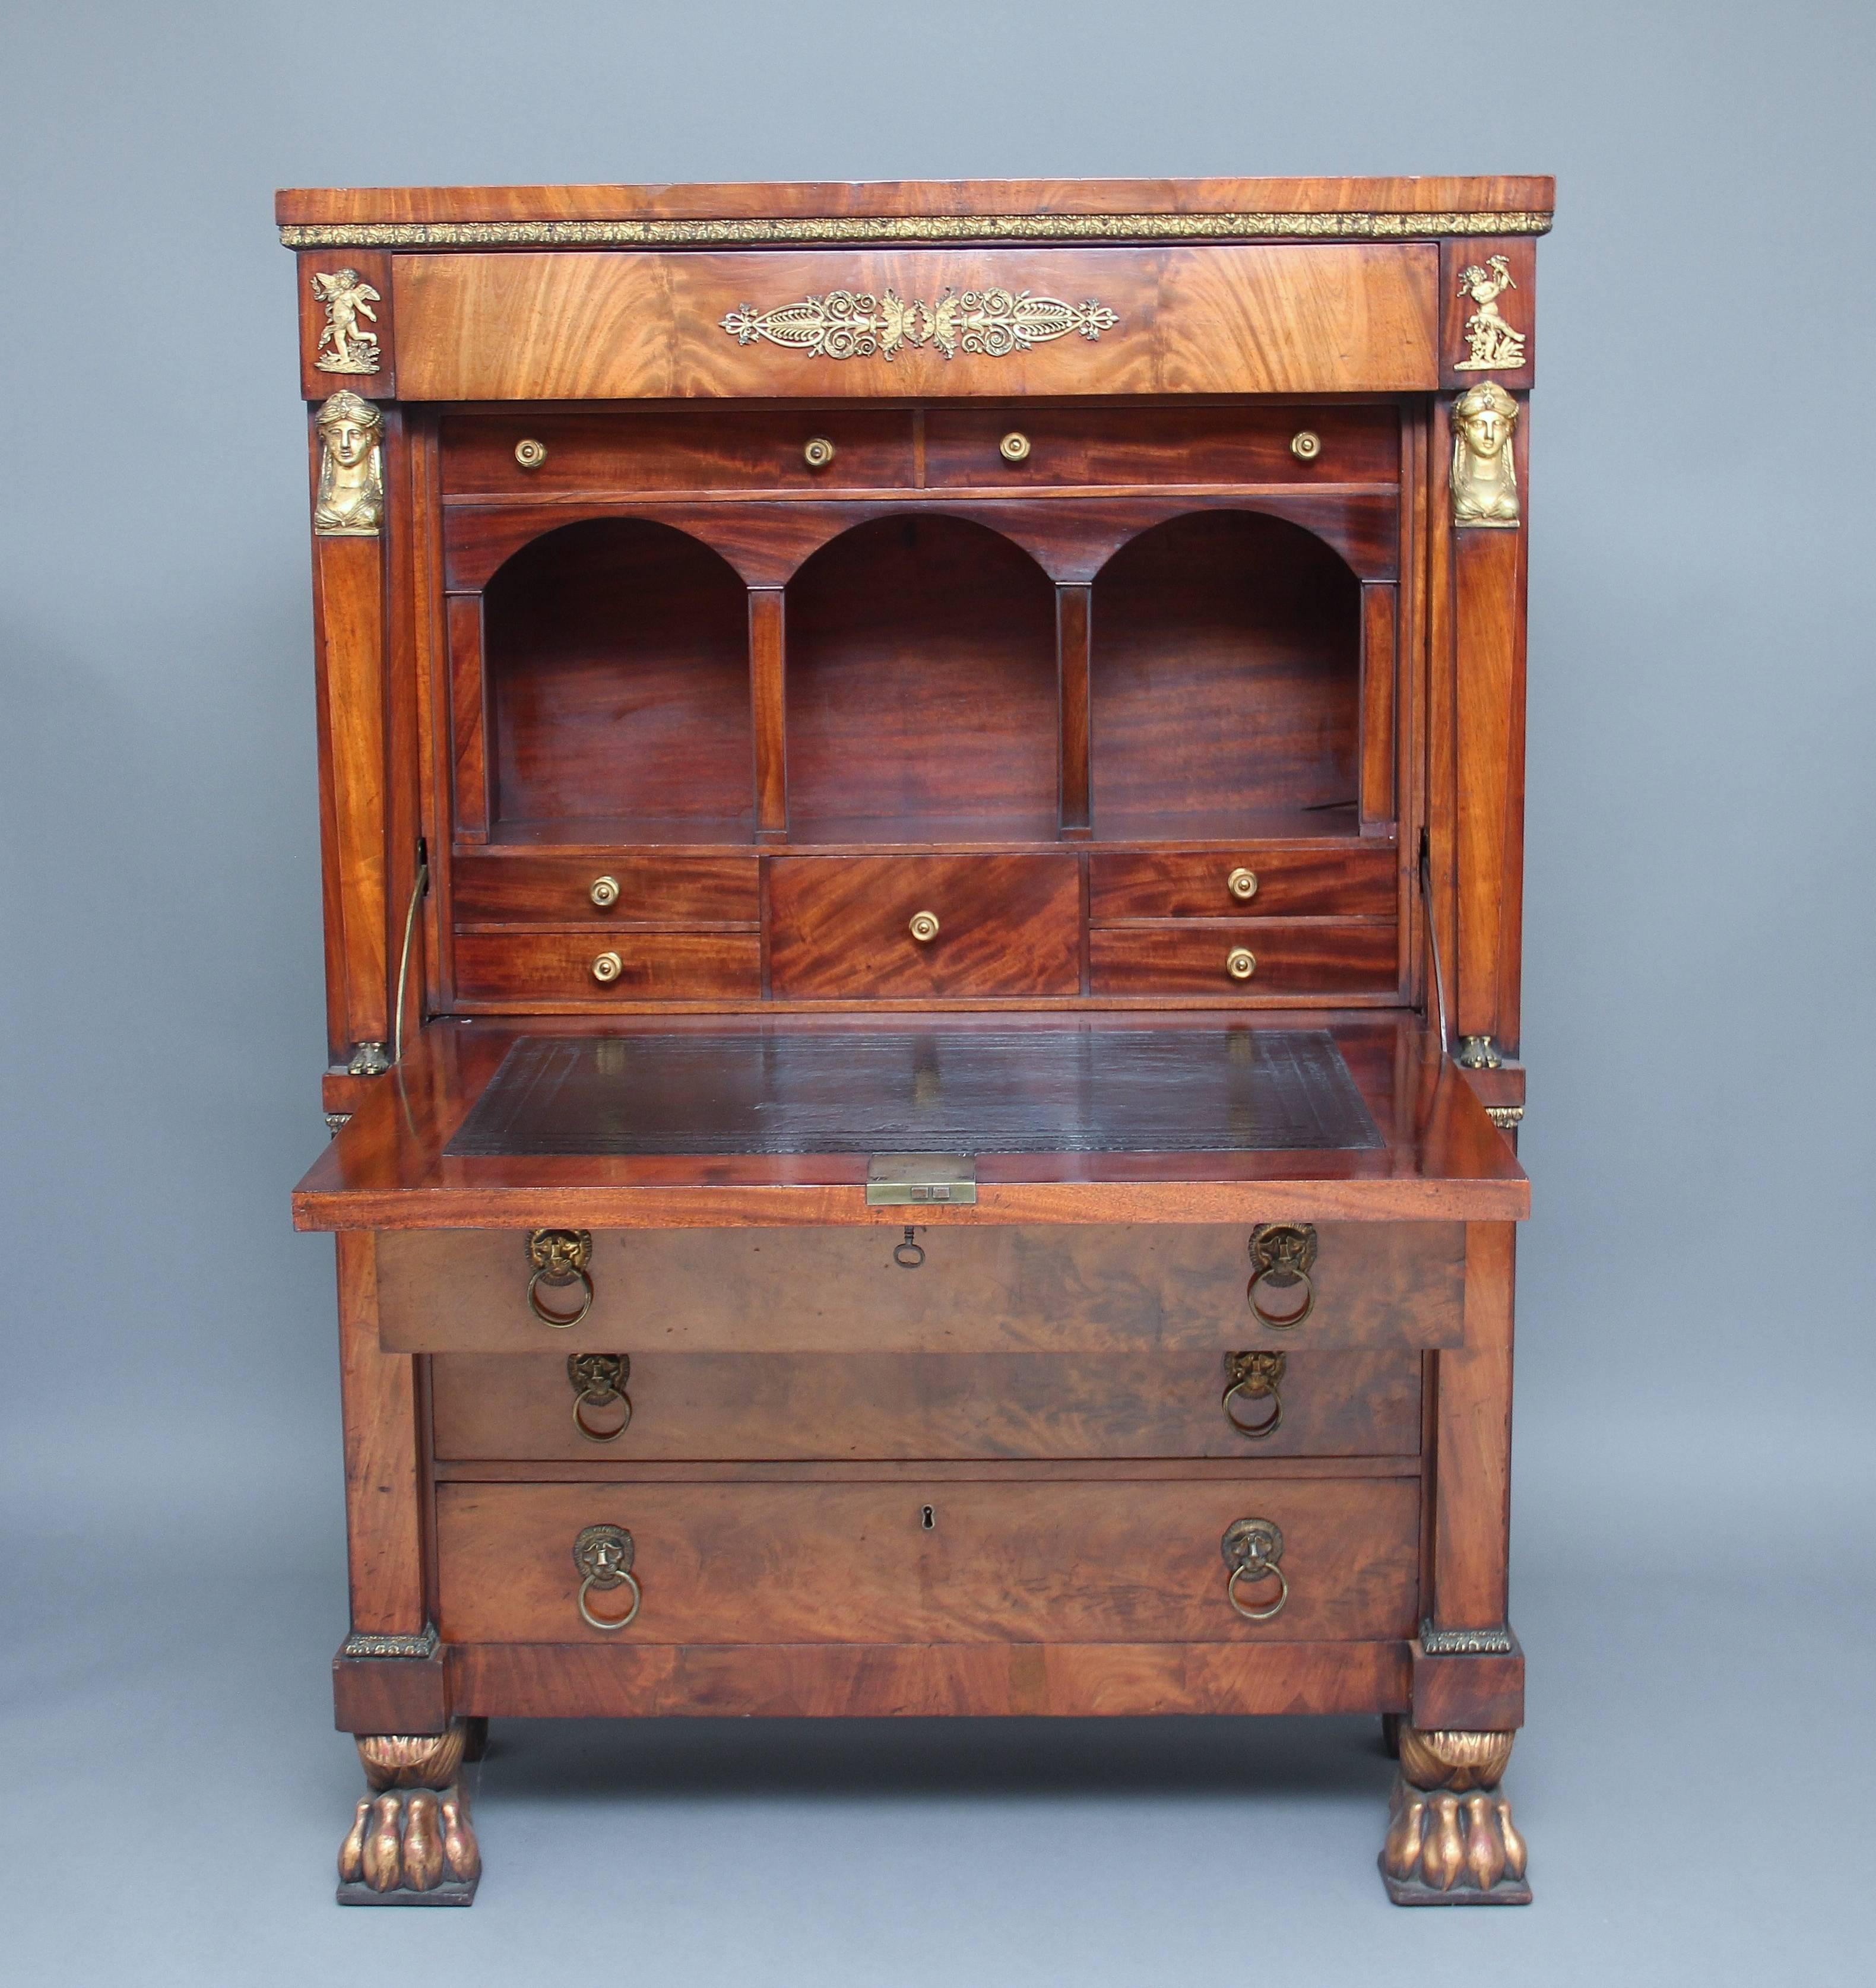 A superb quality early 19th century mahogany escritoire, with ormolu beading running underneath the top along the sides and front, the front of the cabinet having a mahogany lined frieze drawer with ormolu mounts either side, the drop down fall